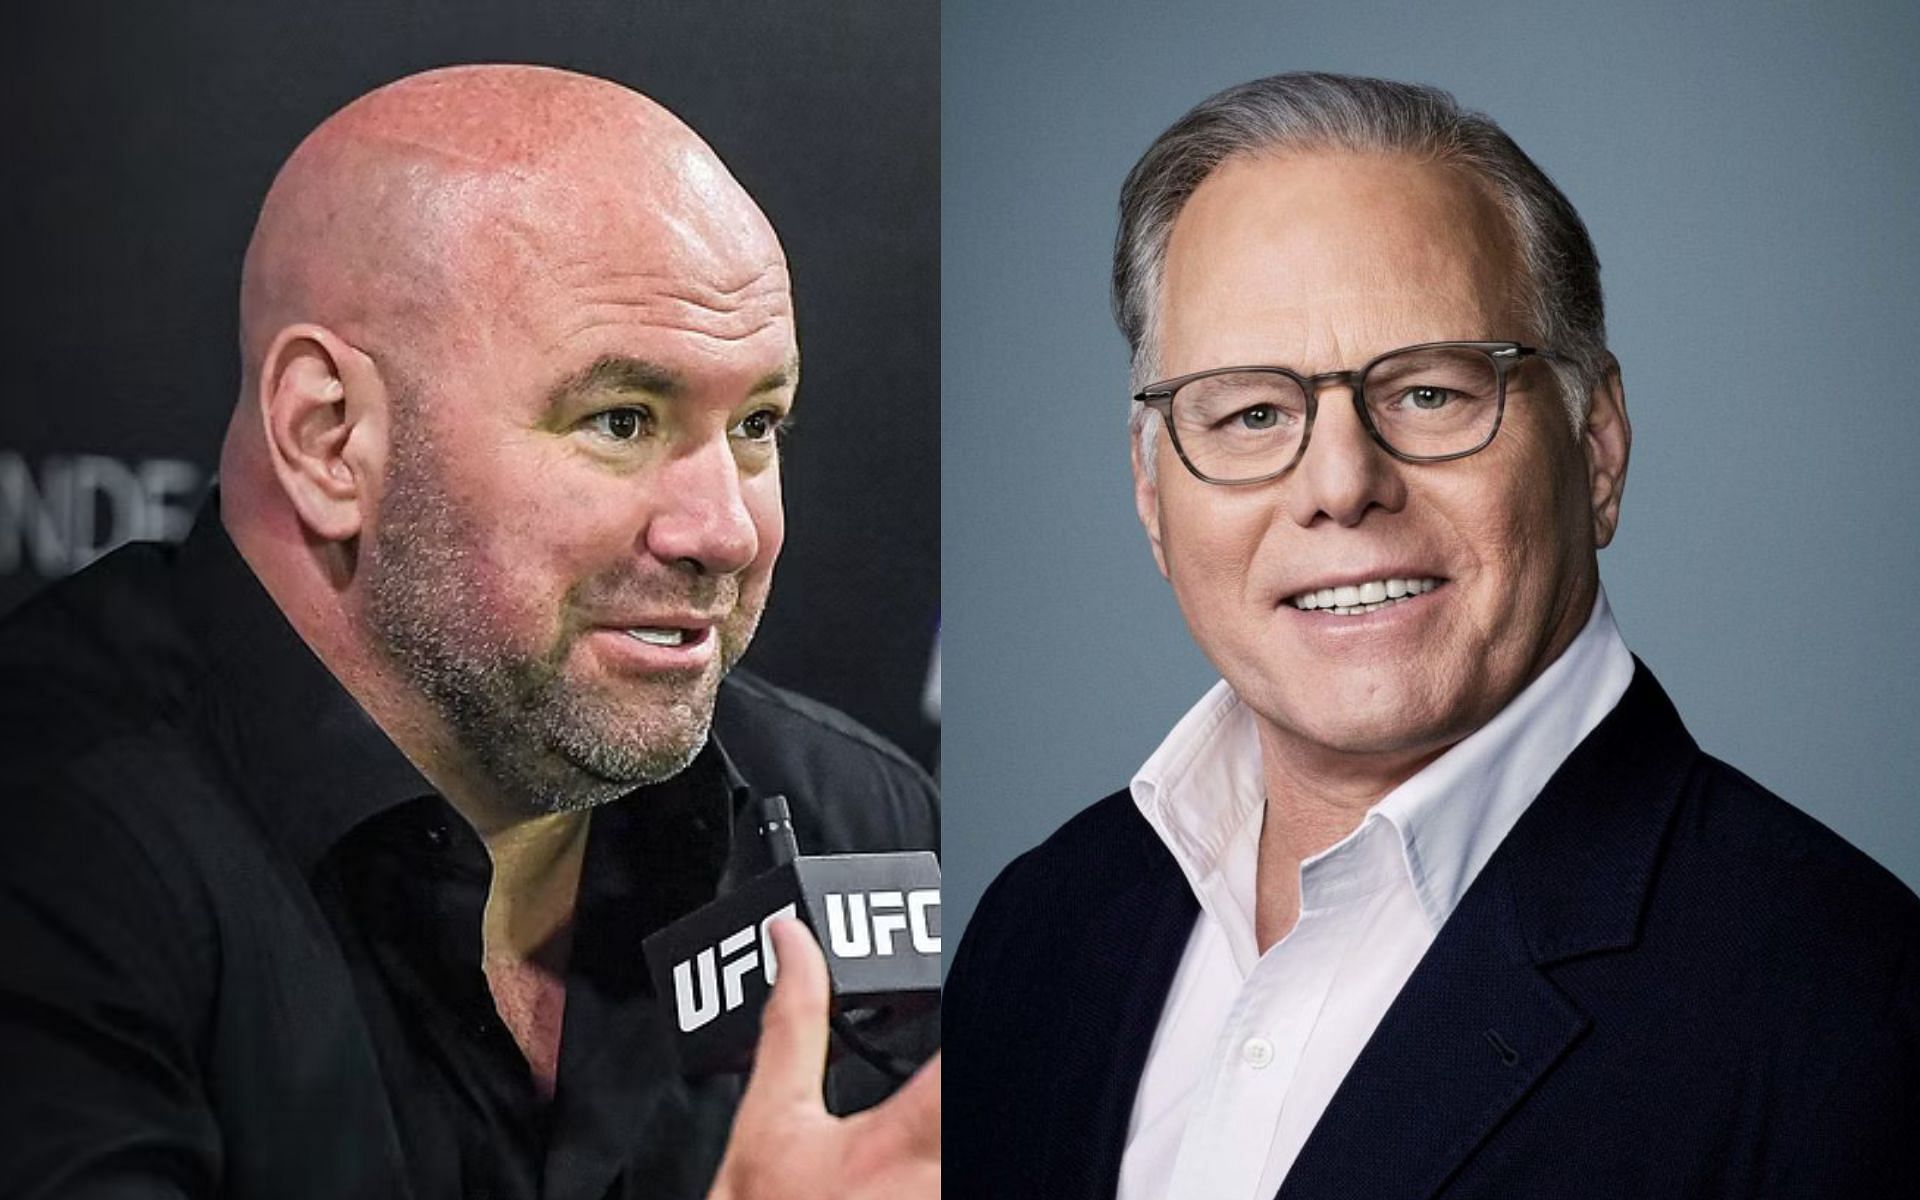 Dana White and David Zaslav. [Images courtesy: Getty Images and Warner Bros. Discovery]